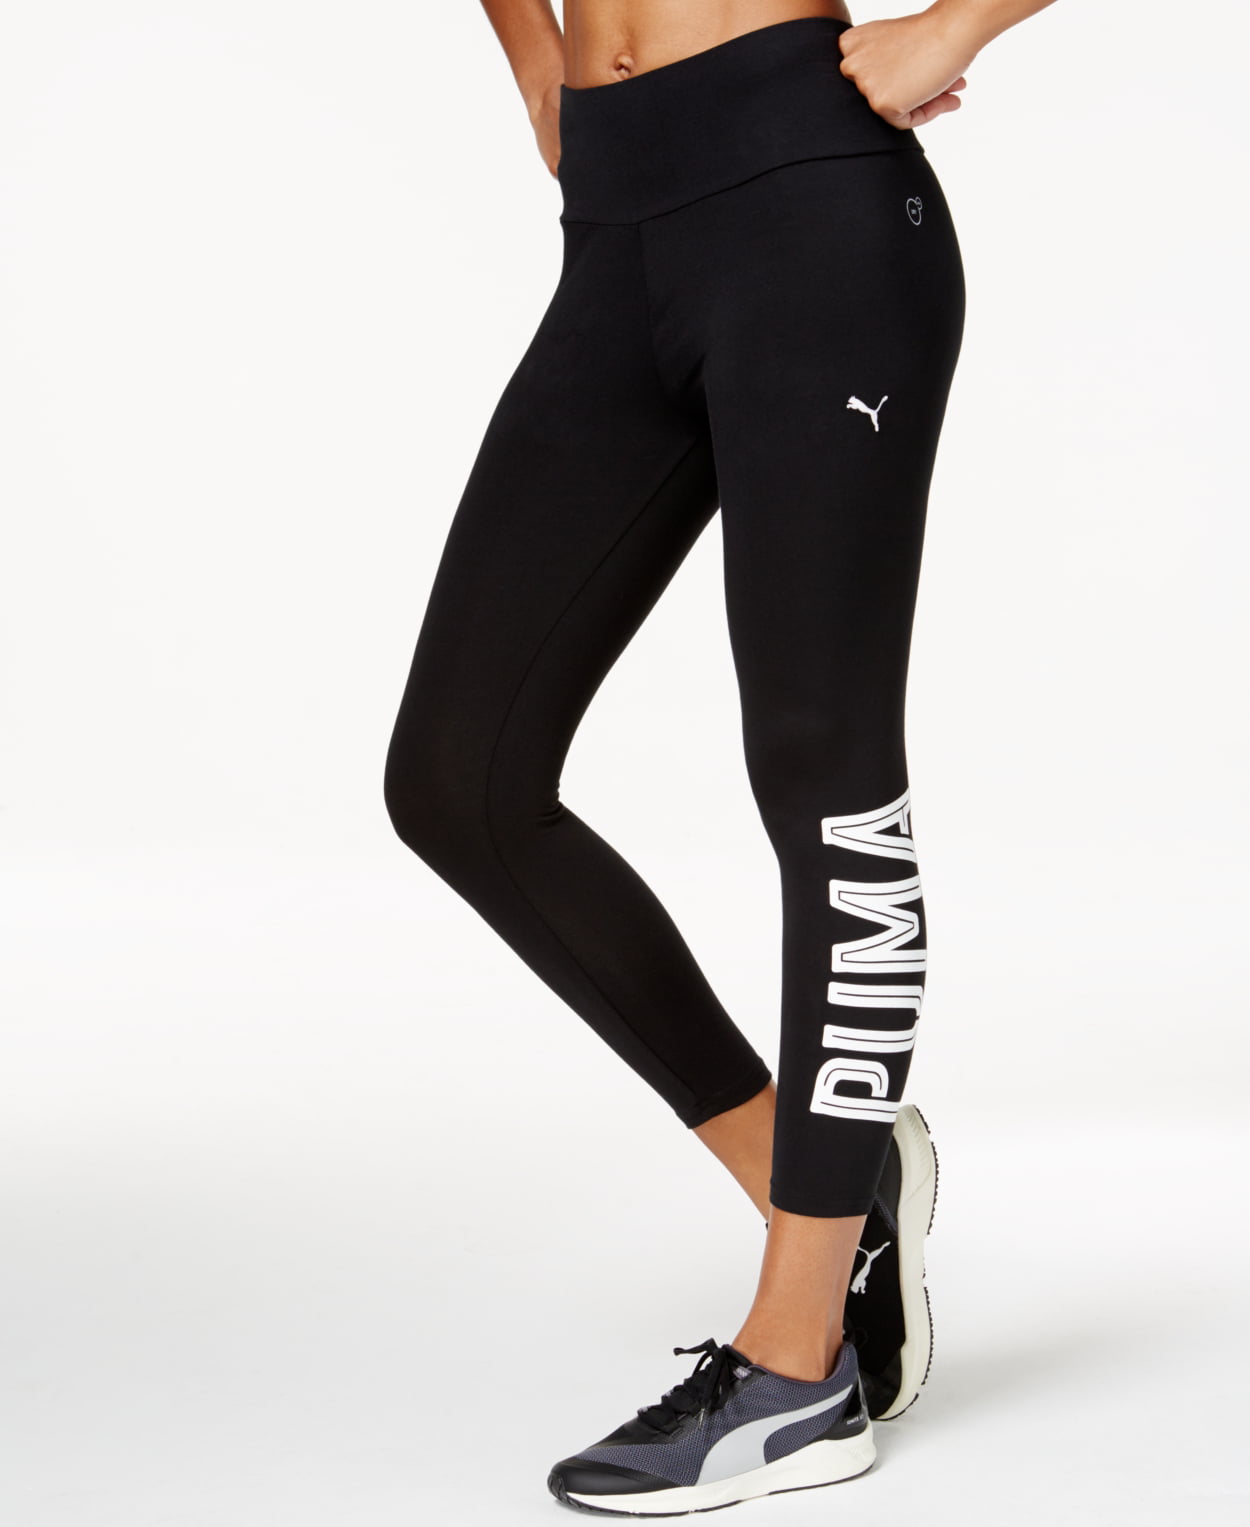 Puma Style Swagger Cropped dryCELL Leggings - Walmart.com